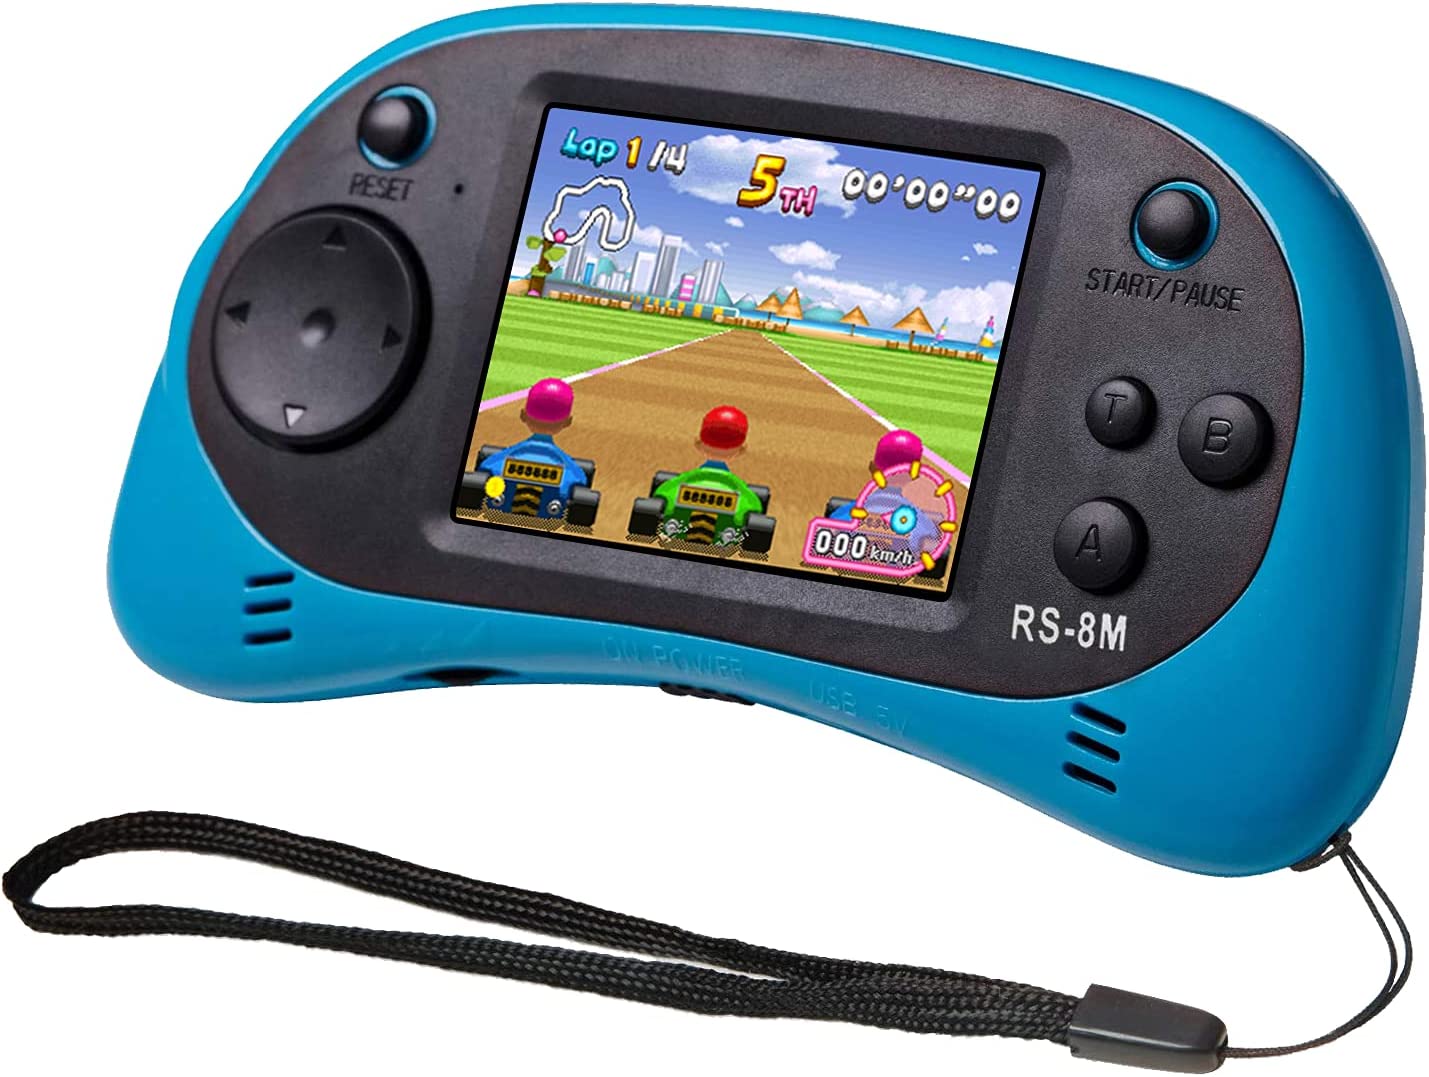 Kids Handheld Game Portable Video Game Player with 200 Games 16 Bit 2.5 Inch Screen Mini Retro Electronic Game Machine ,Best Gift for Kid (Blue)